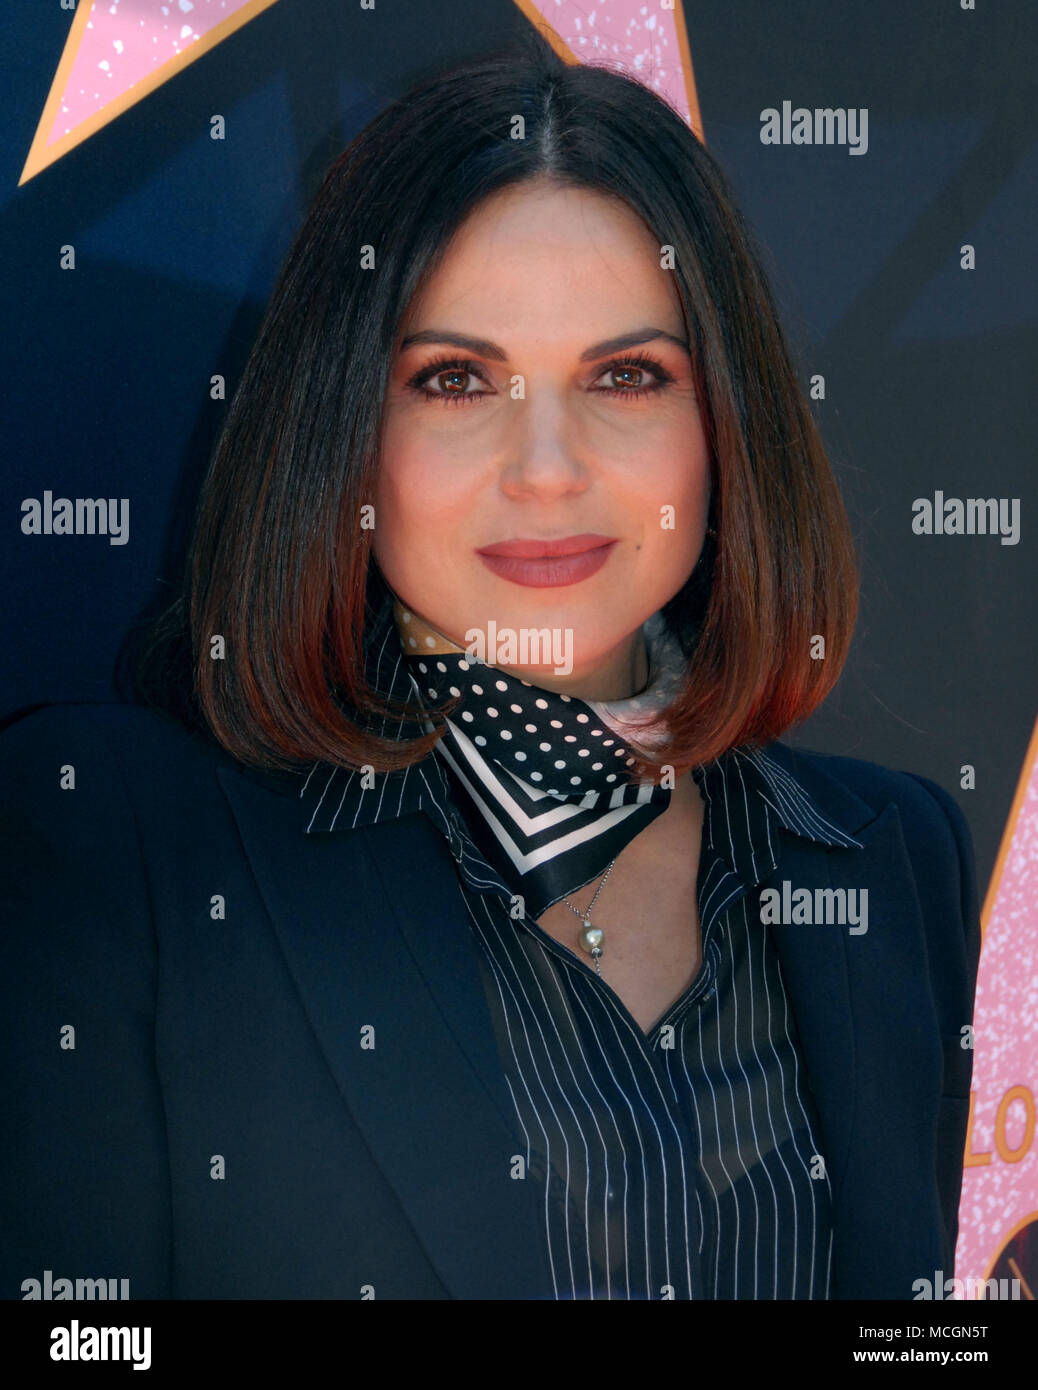 BEVERLY HILLS, CA - APRIL 16: Actress Lan Parrilla attends post reception luncheon for Eva Longoria Star on Walk of Fame on April 16, 2018 in Beverly Hills, California. Photo by Barry King/Alamy Live News Stock Photo